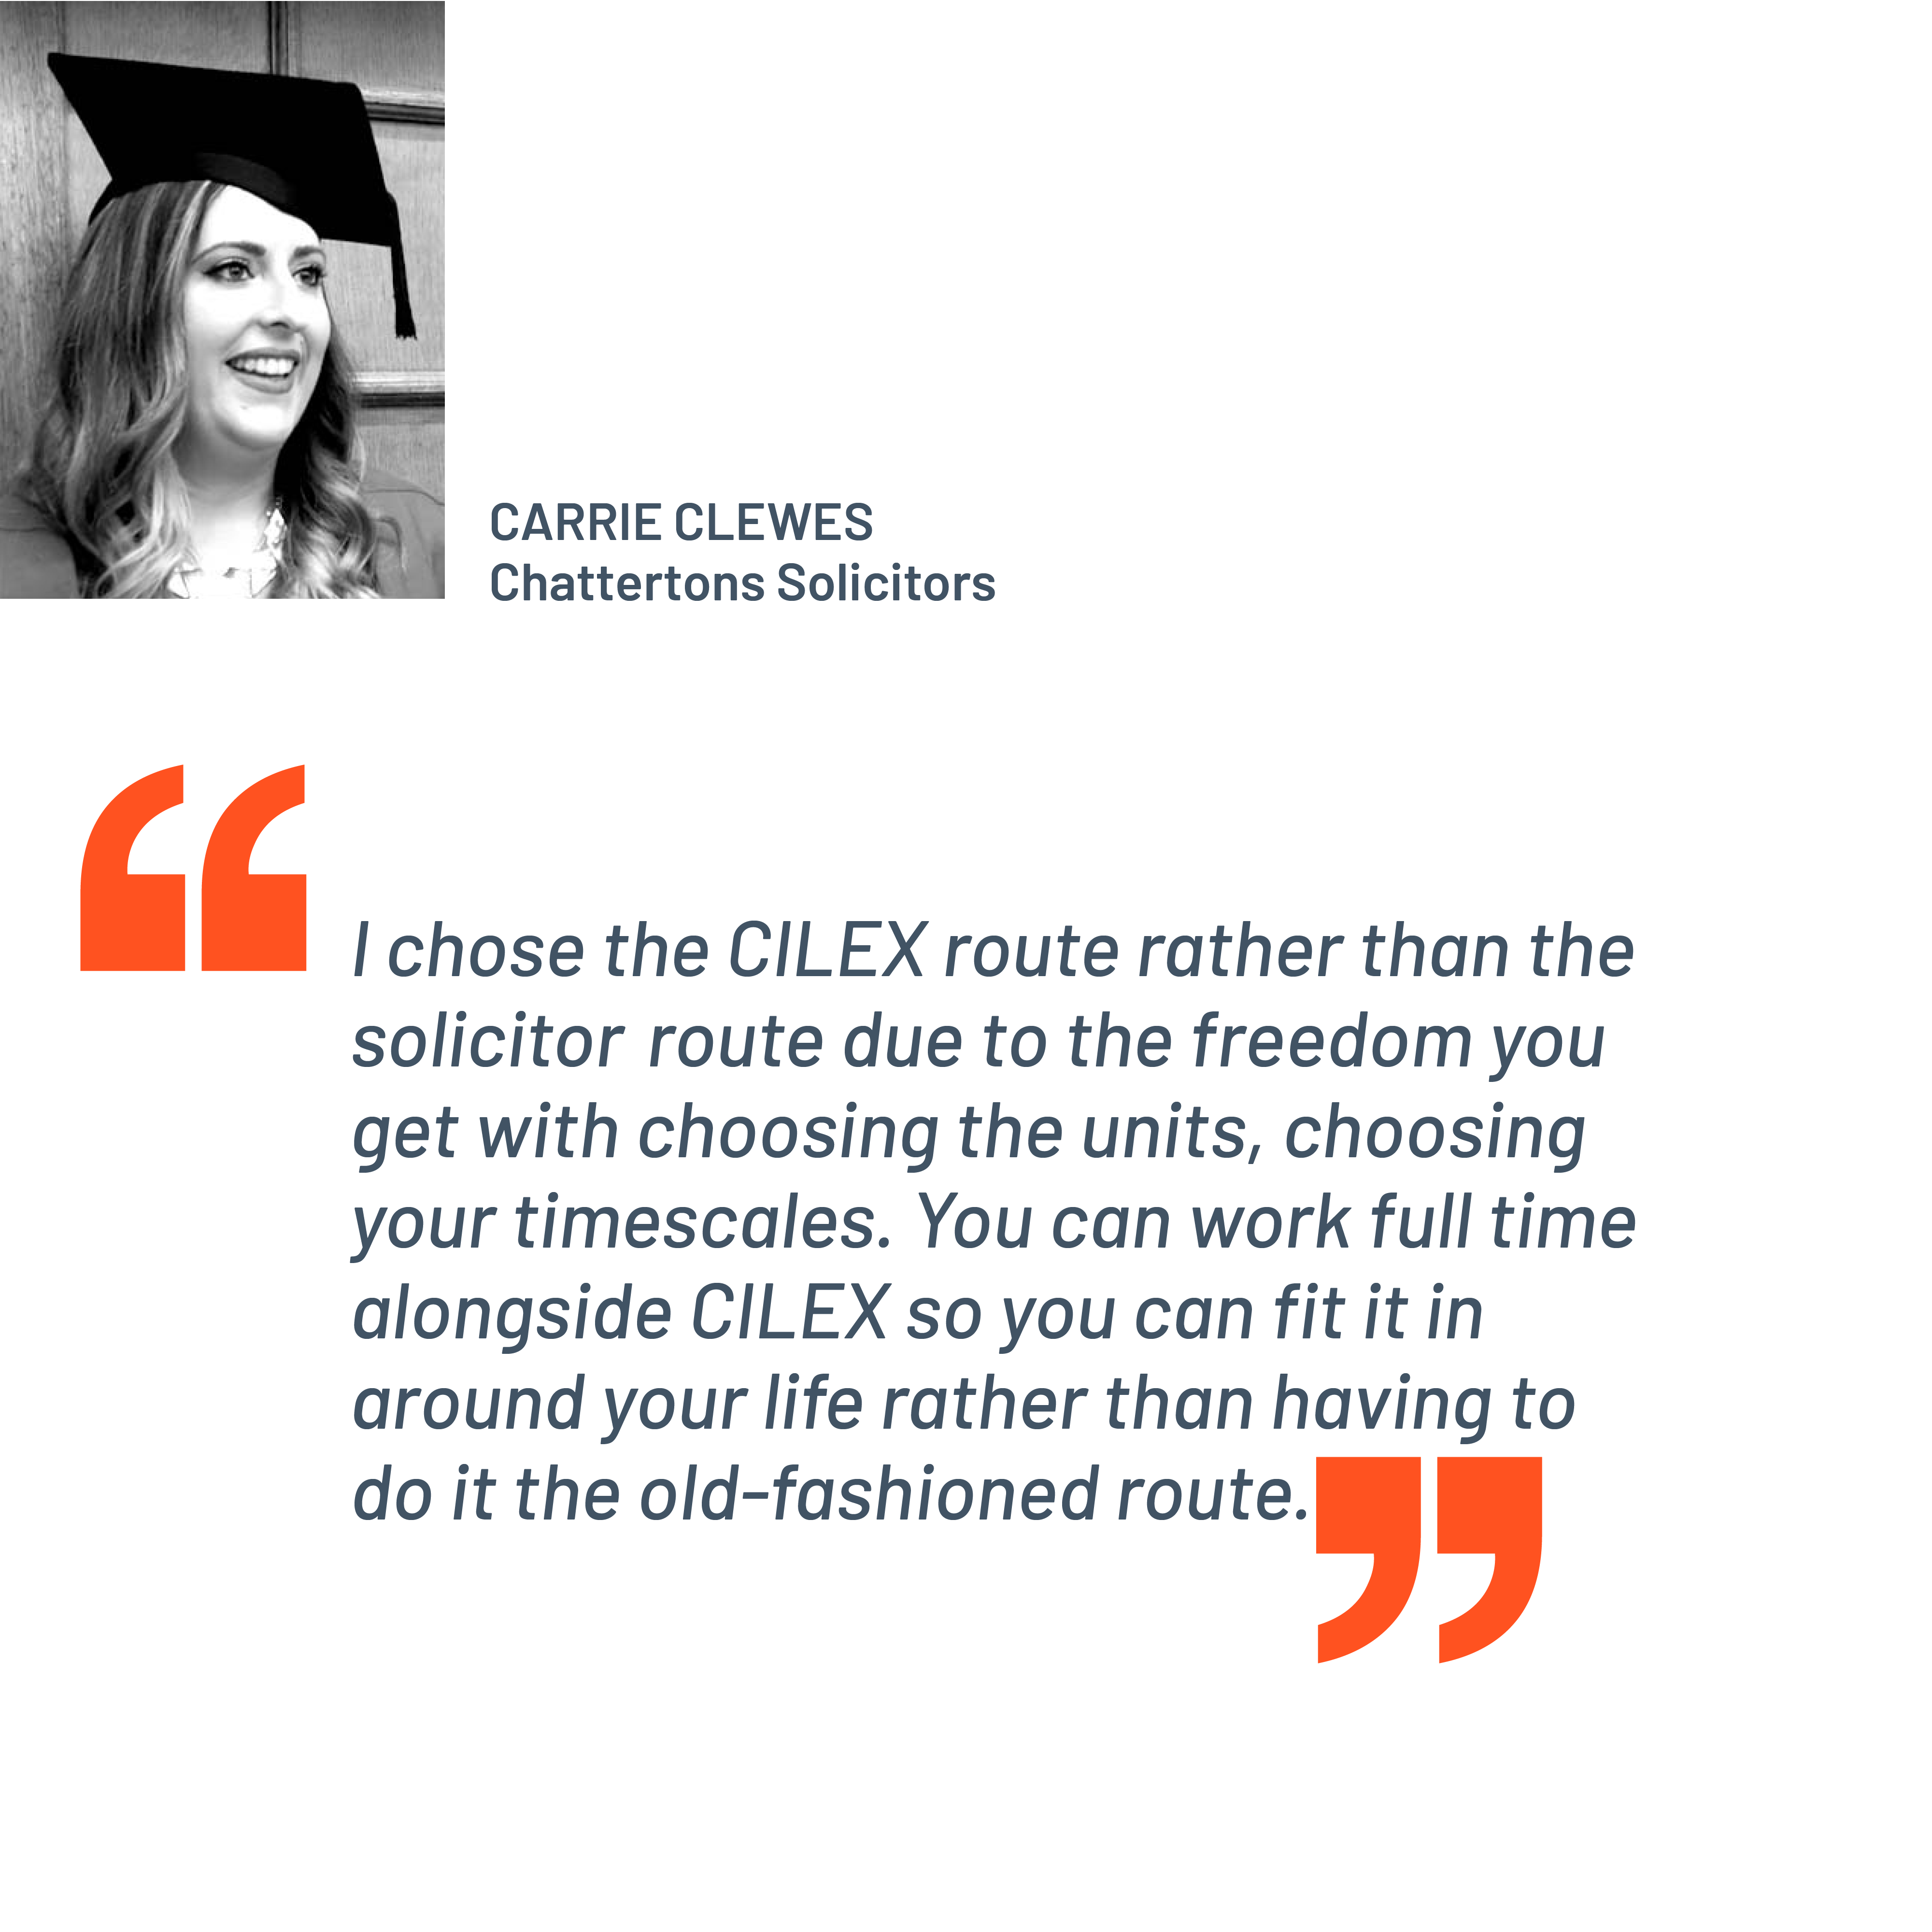 Quote from Carrie Clewes, Chattertons Solicitors. 